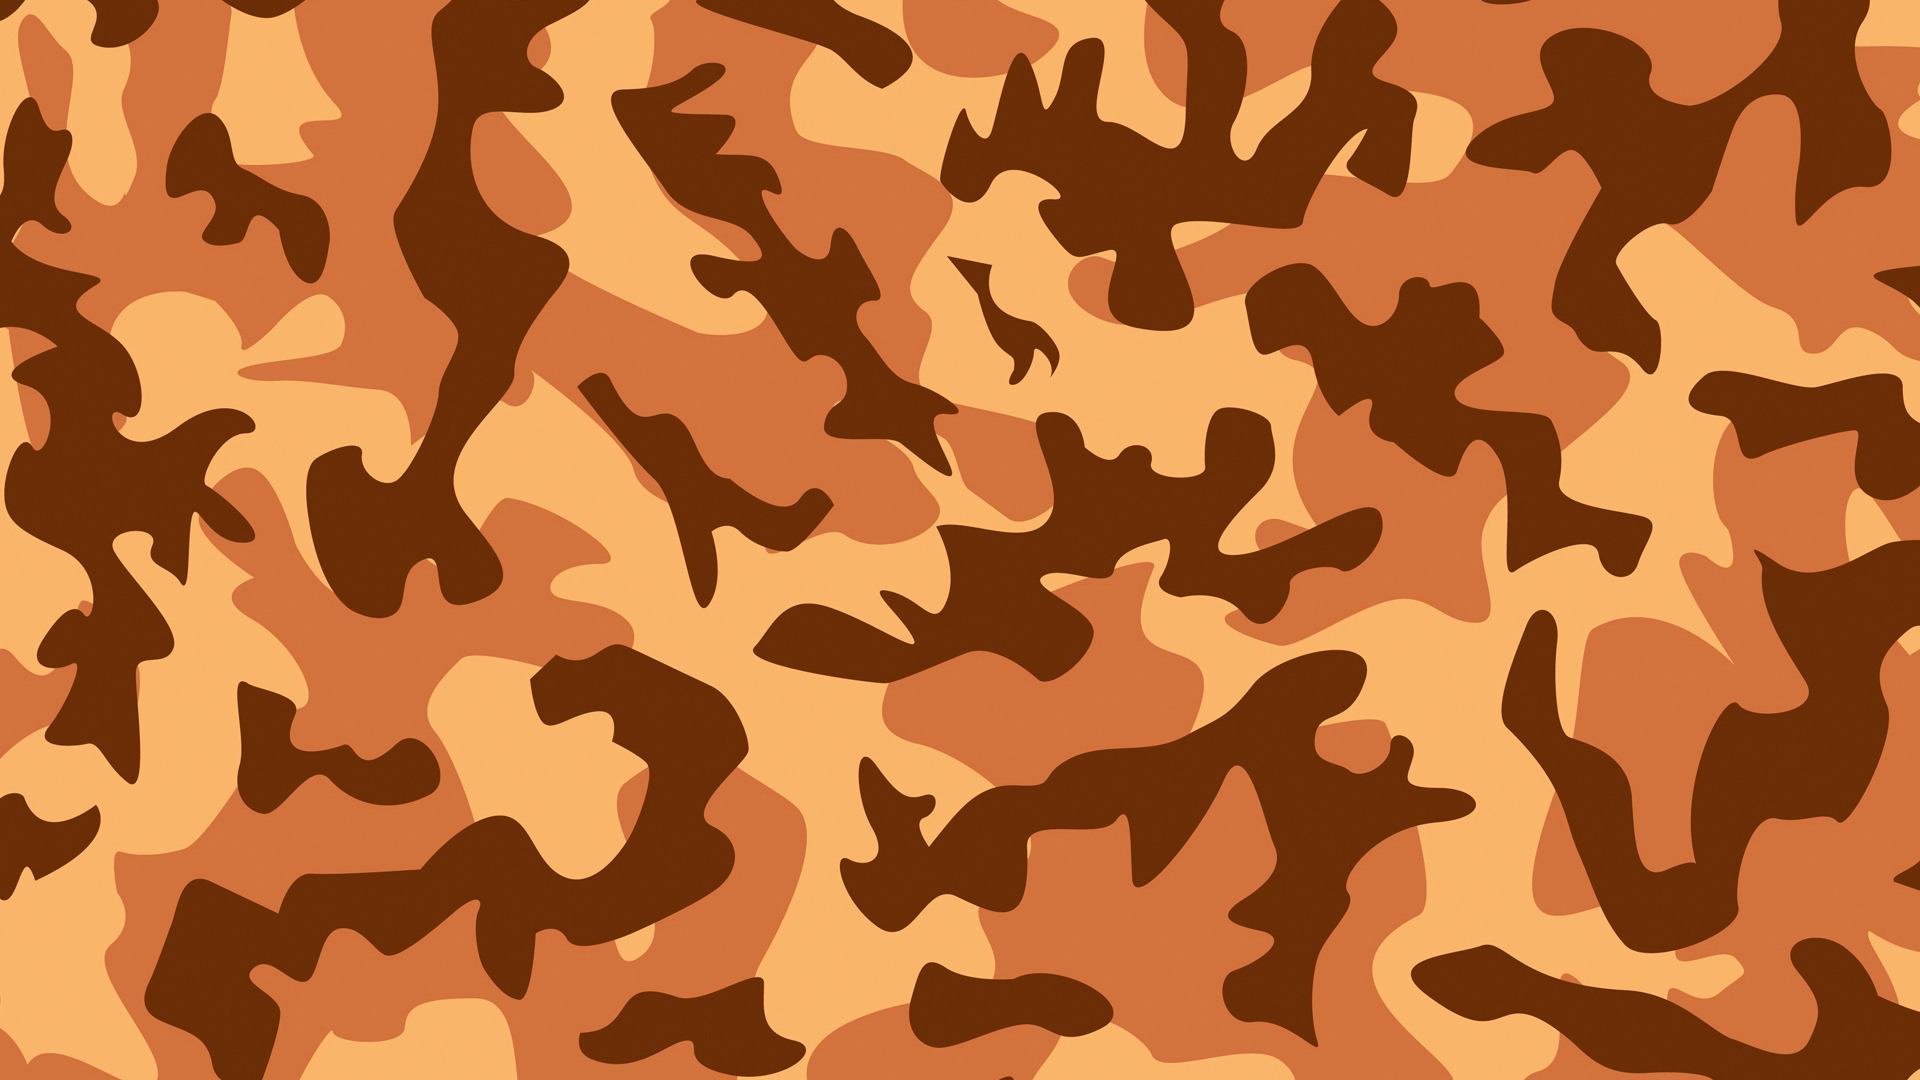 Download wallpaper War, Army, Soldier, Texture, Camouflage, Pattern, Camo,  section textures in resolution 1920x1080